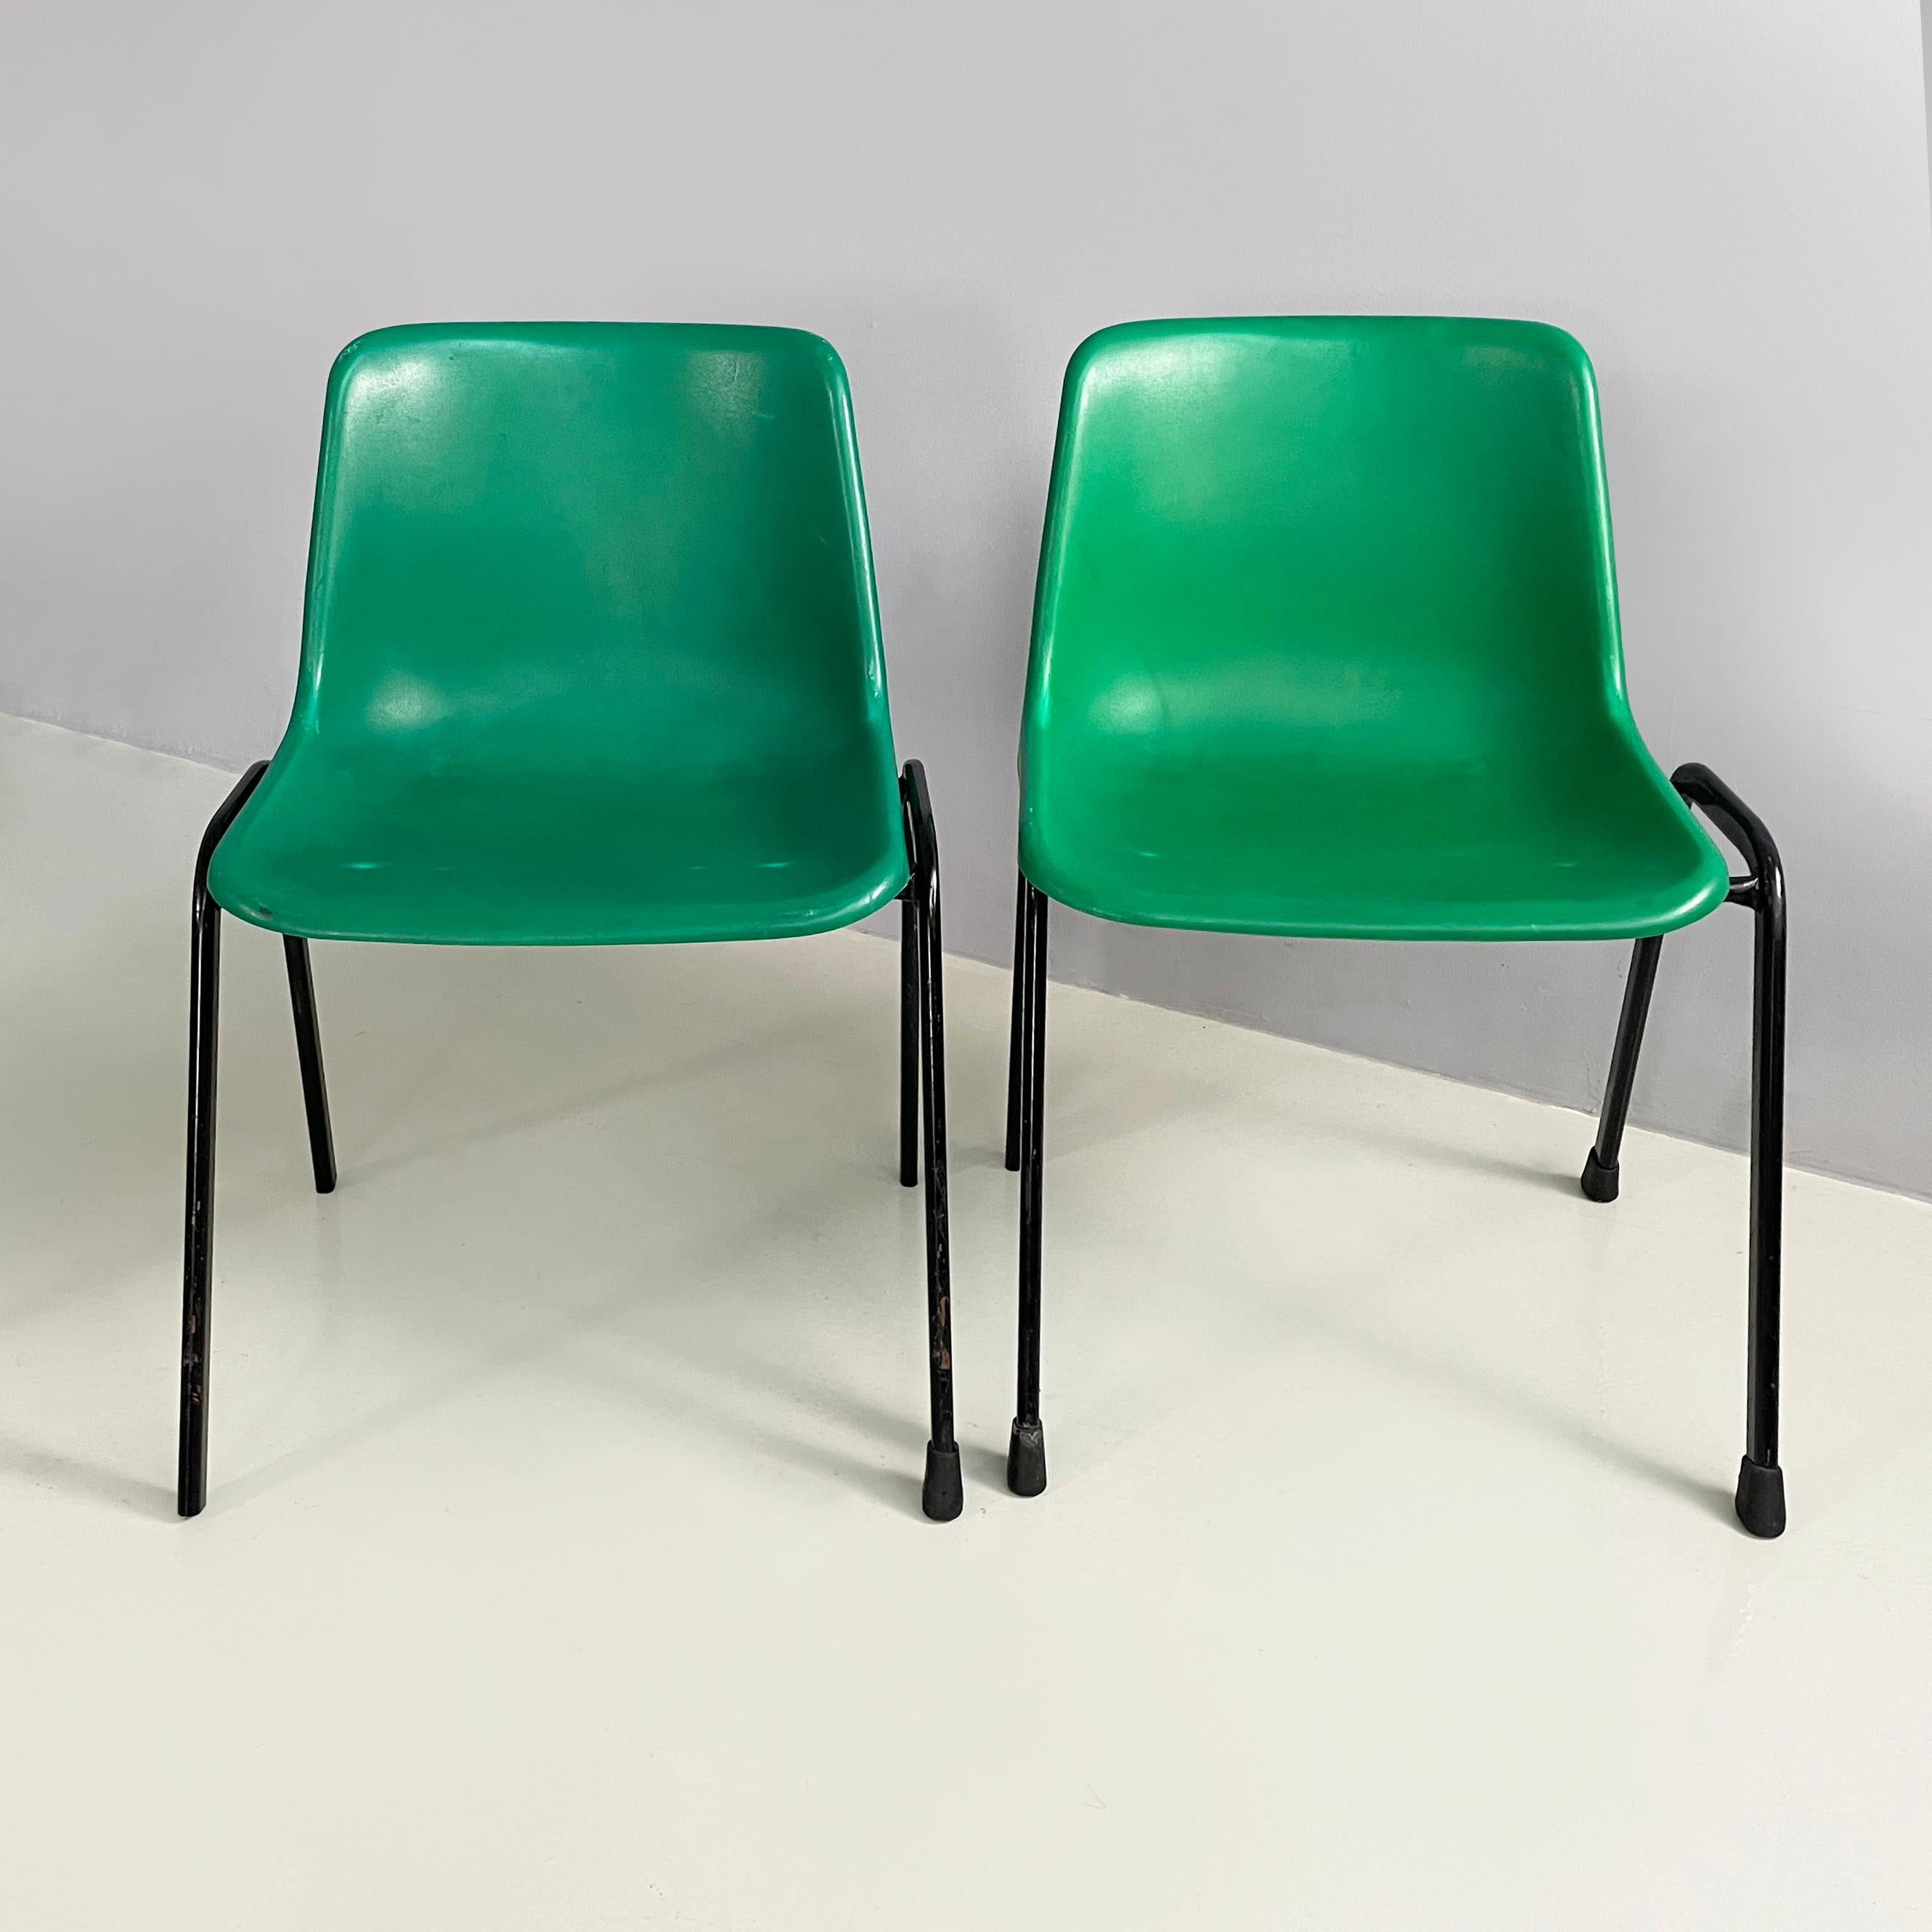 Italian modern Stackable chairs in green plastic and black metal, 2000s
Set of 12 chairs with curved monocoque in green plastic. The oval section legs are made of black painted metal with black rubber feet. Stackable.
2000s. Under the seat there is